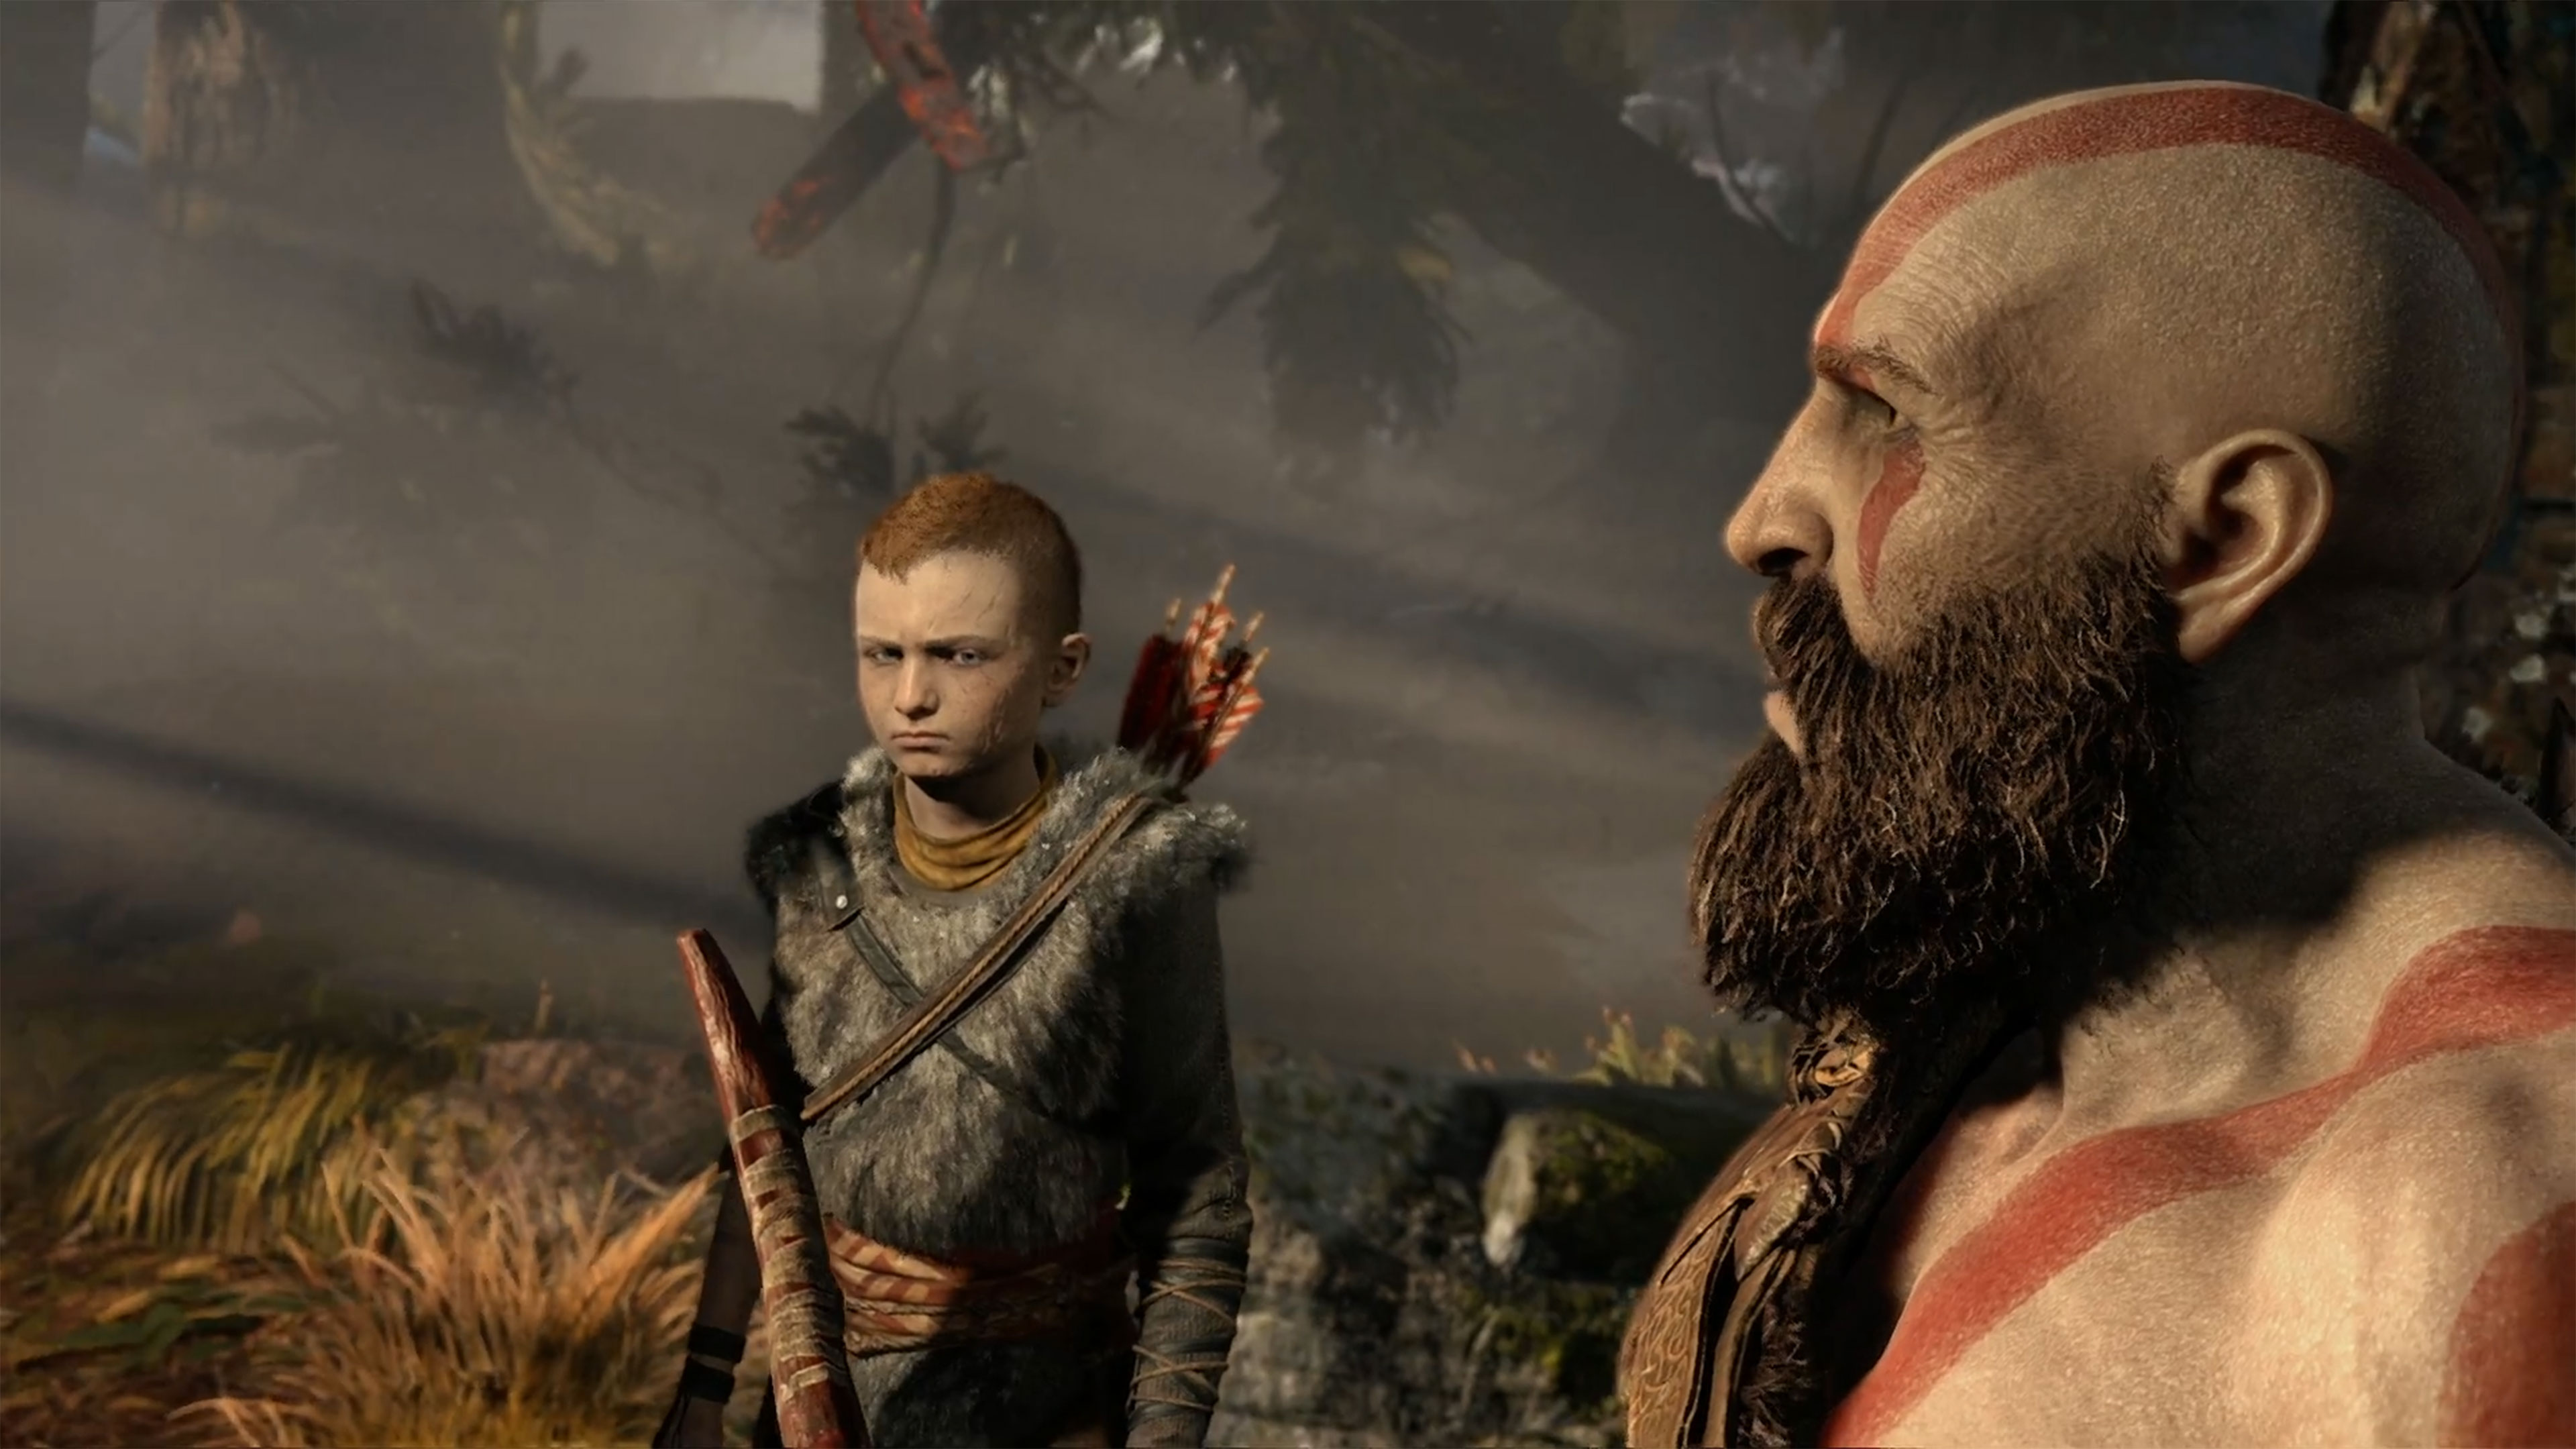 god of war wallpaper hd,action adventure game,pc game,beard,facial hair,strategy video game